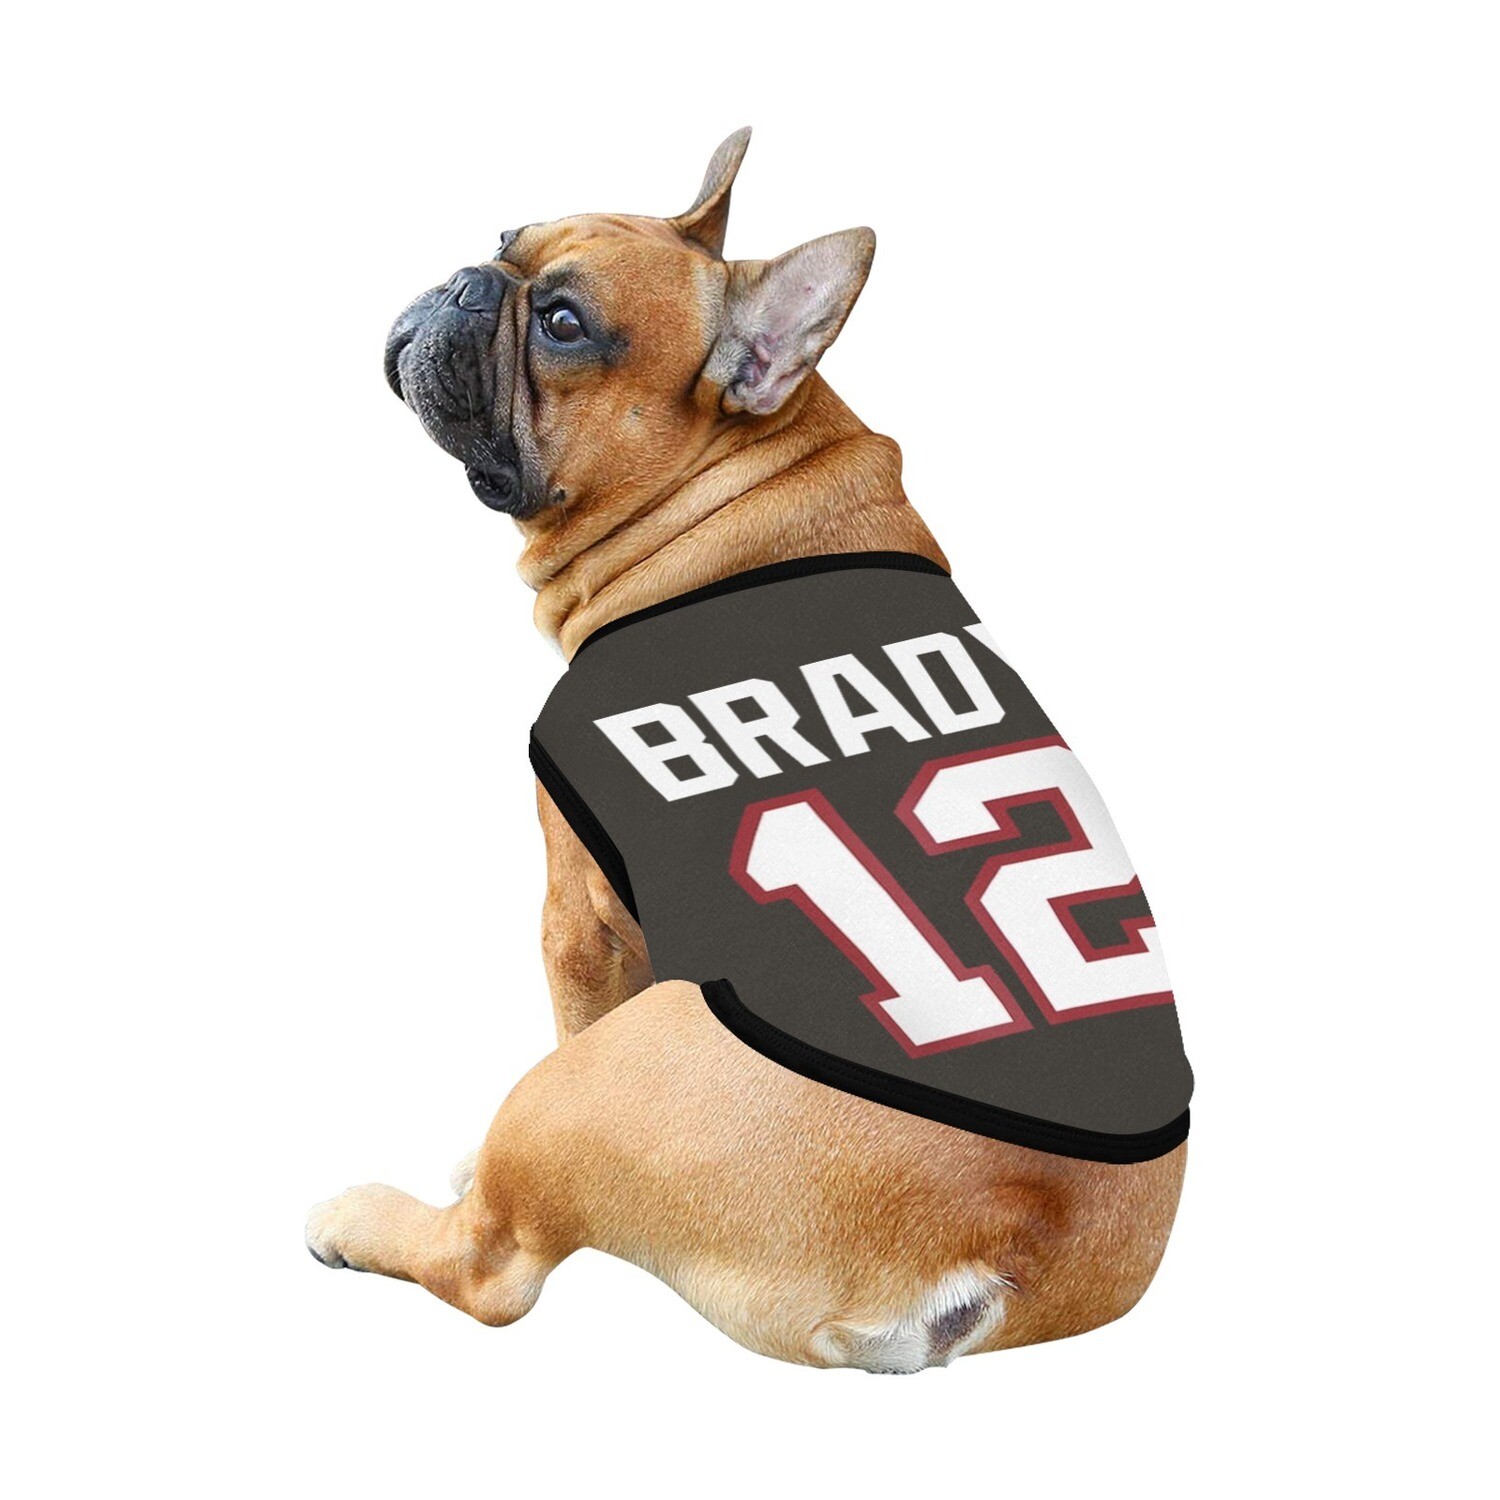 🐕 USA NFL Tampa Bay Buccaneers Tom Brady Dog t-shirt, Dog Tank Top, Dog shirt, Dog clothes, Gifts, front back print, 7 sizes XS to 3XL, gray pewter